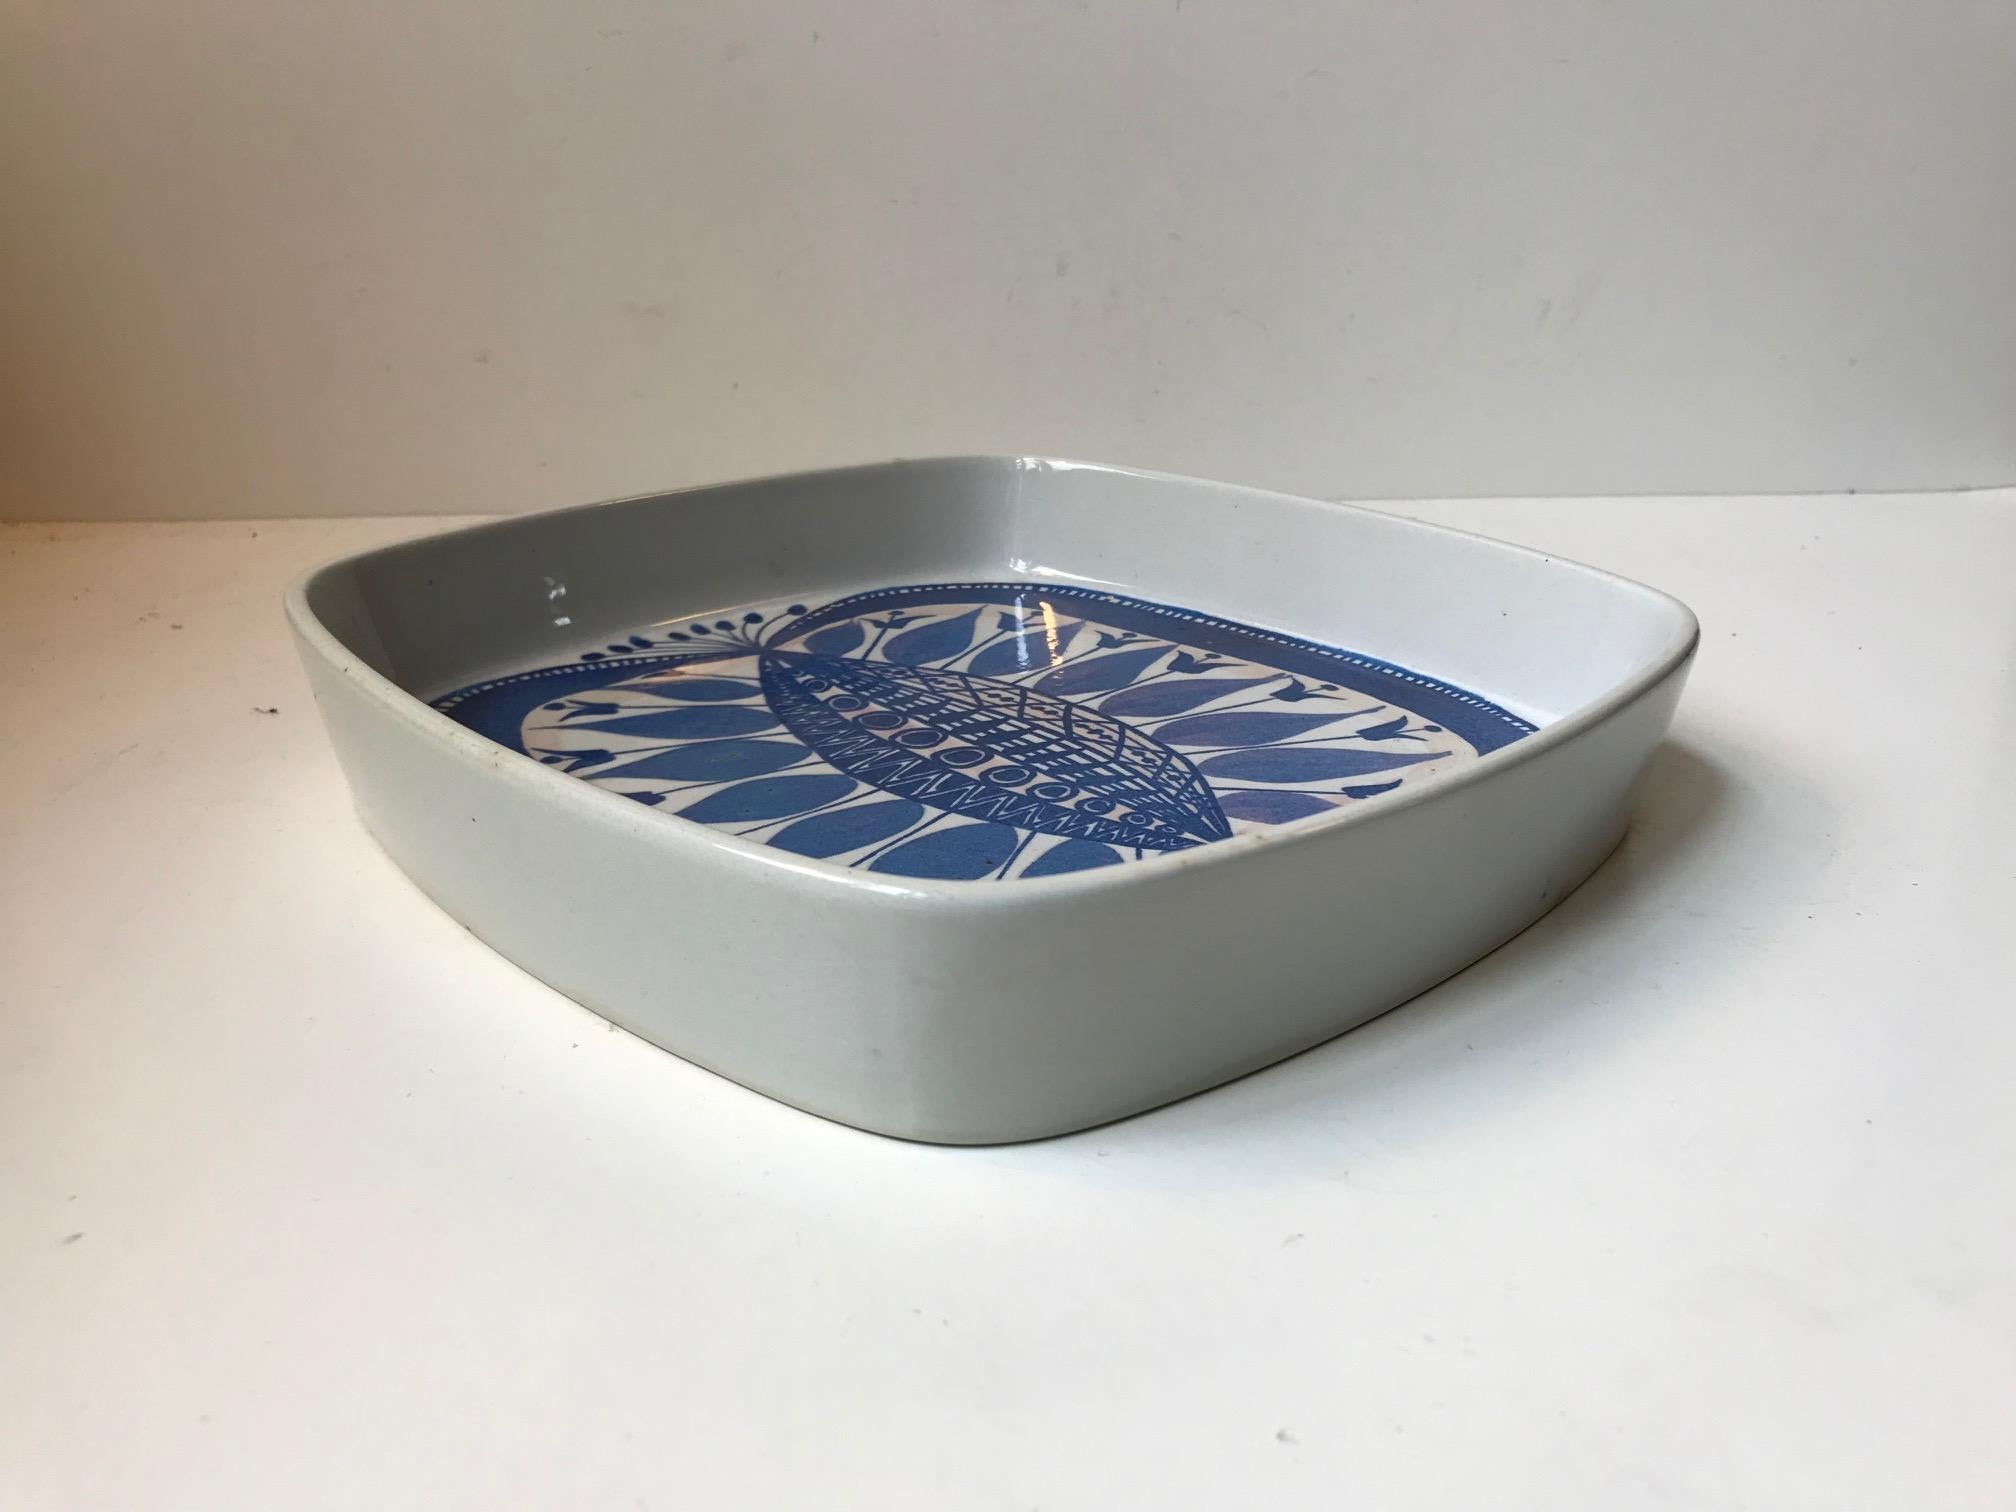 This ceramic dish was designed by the Danish ceramist/painter Beth Breyen. It was manufactured at Alumina and Royal Copenhagen in Denmark during the 1960s and 1970s. This one is special as it is a sample (Prøve in Danish) made prior to the series